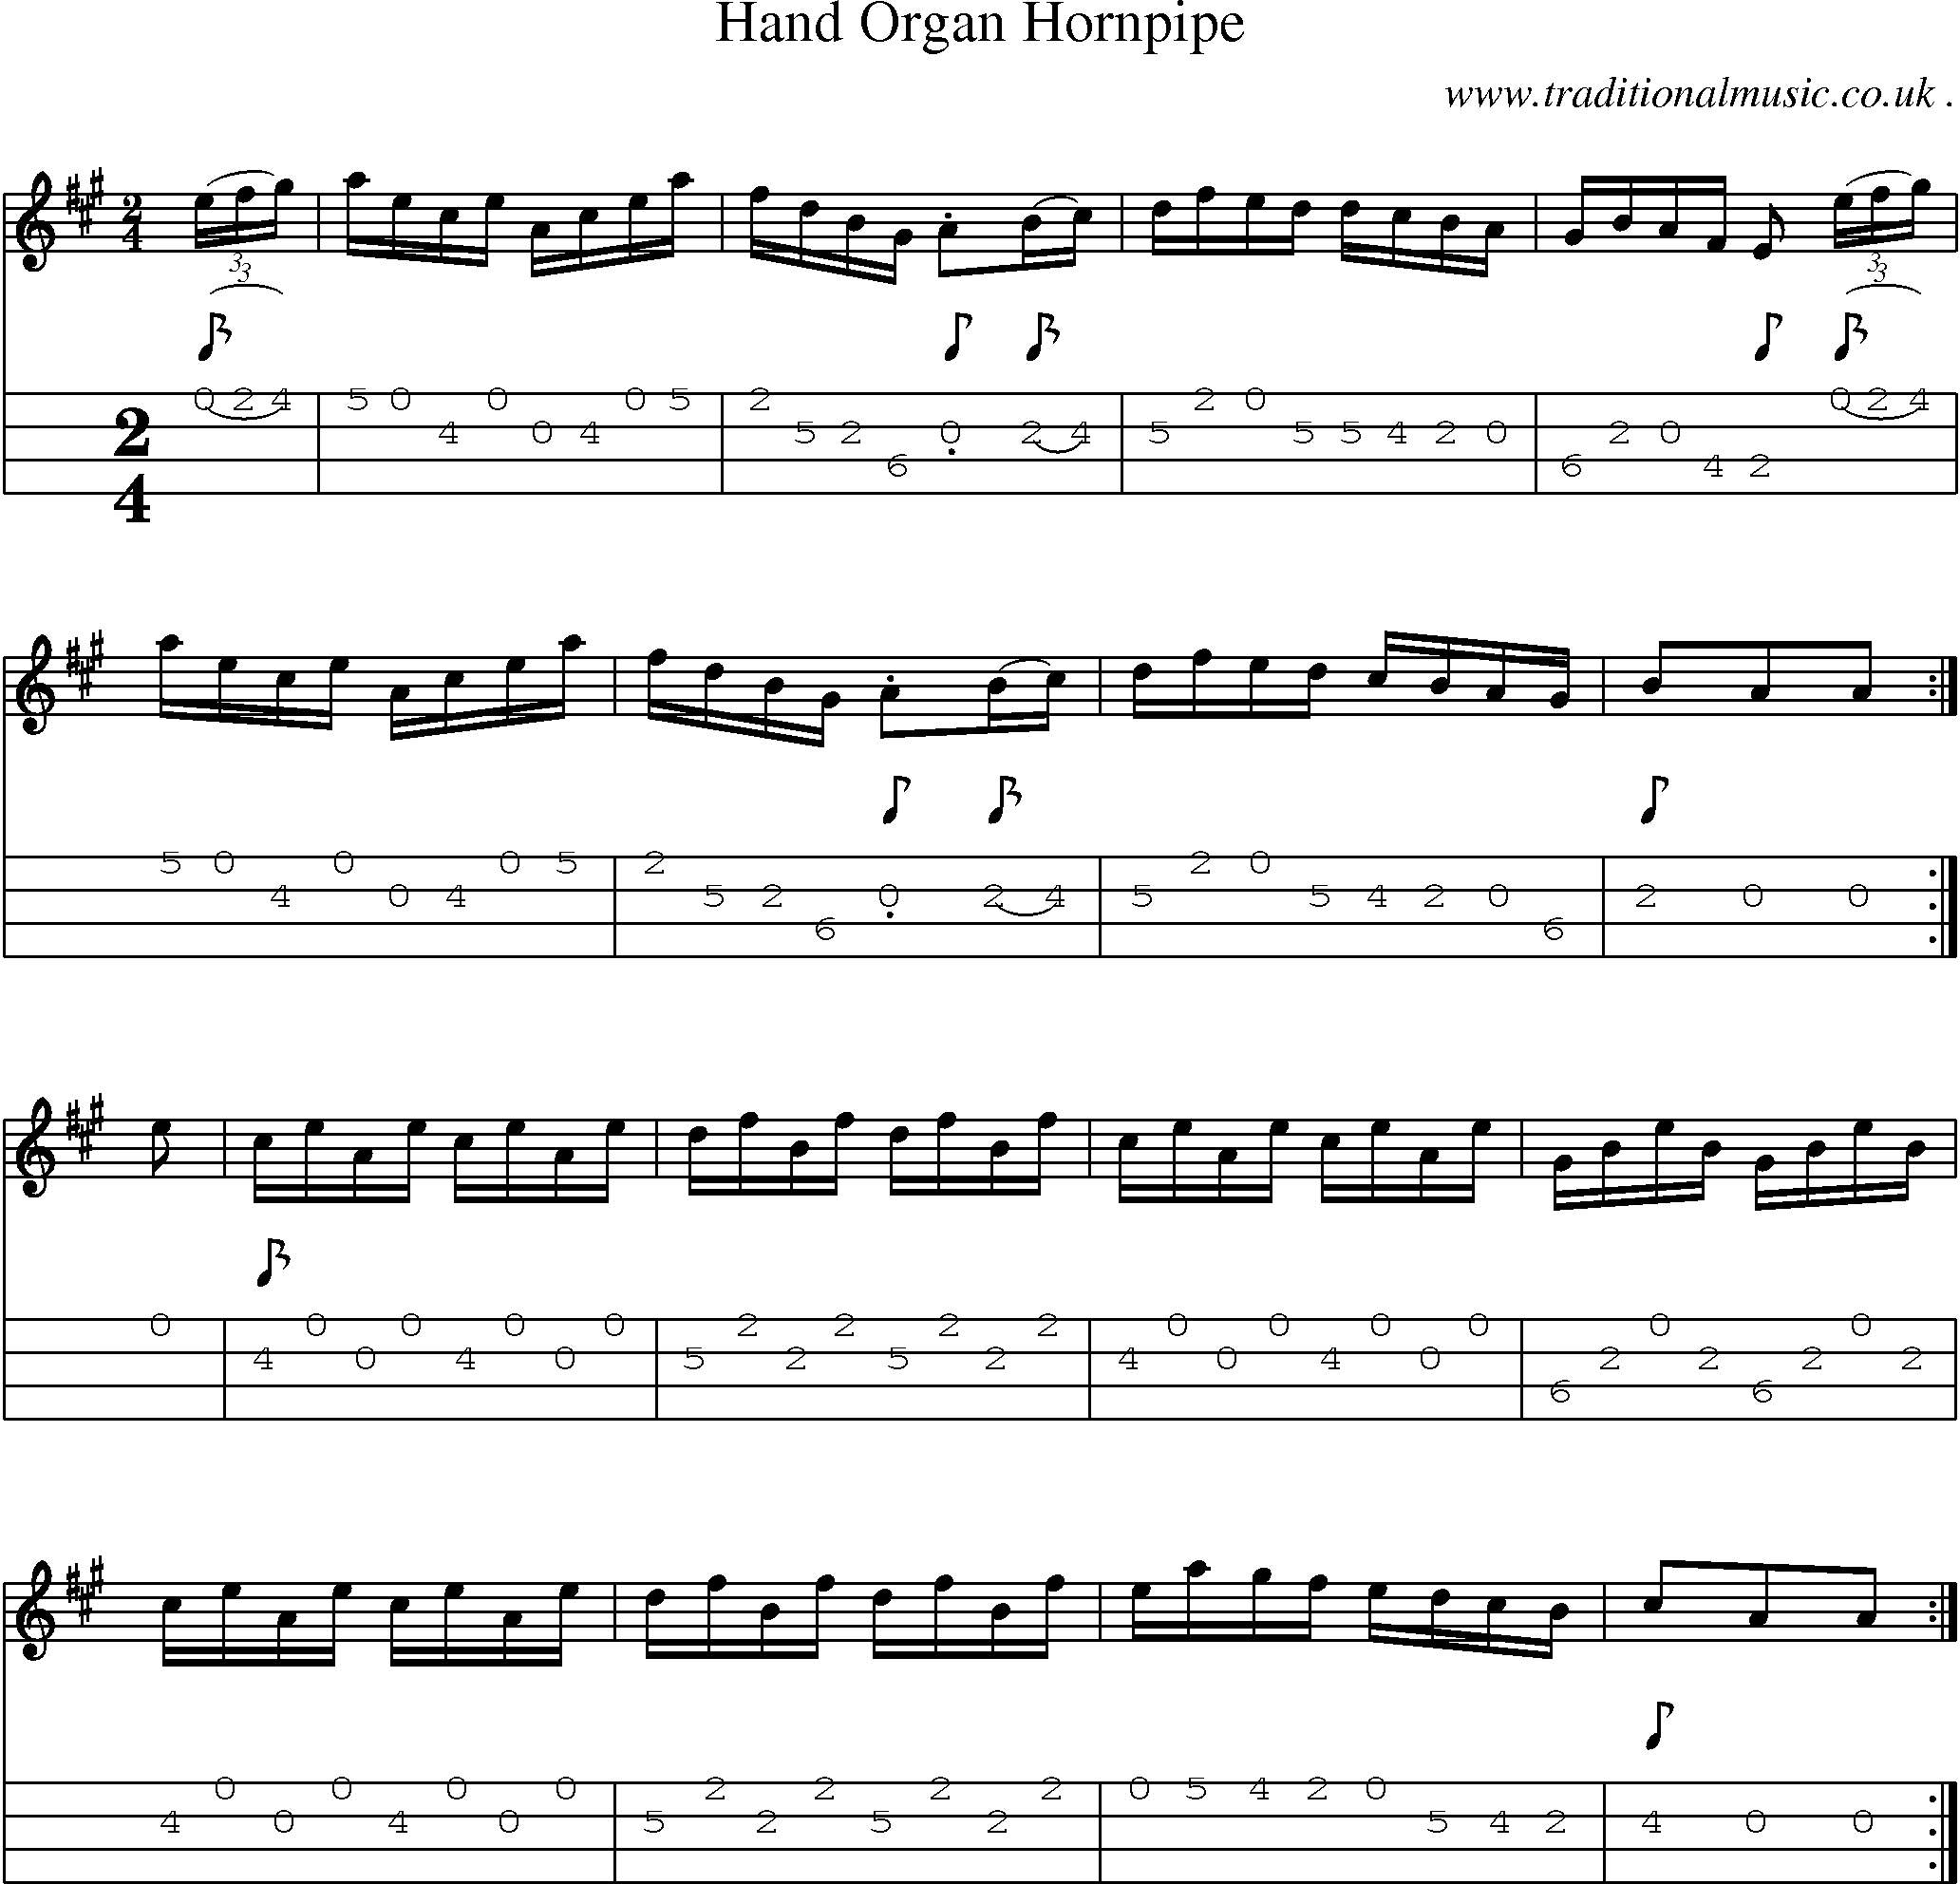 Sheet-Music and Mandolin Tabs for Hand Organ Hornpipe